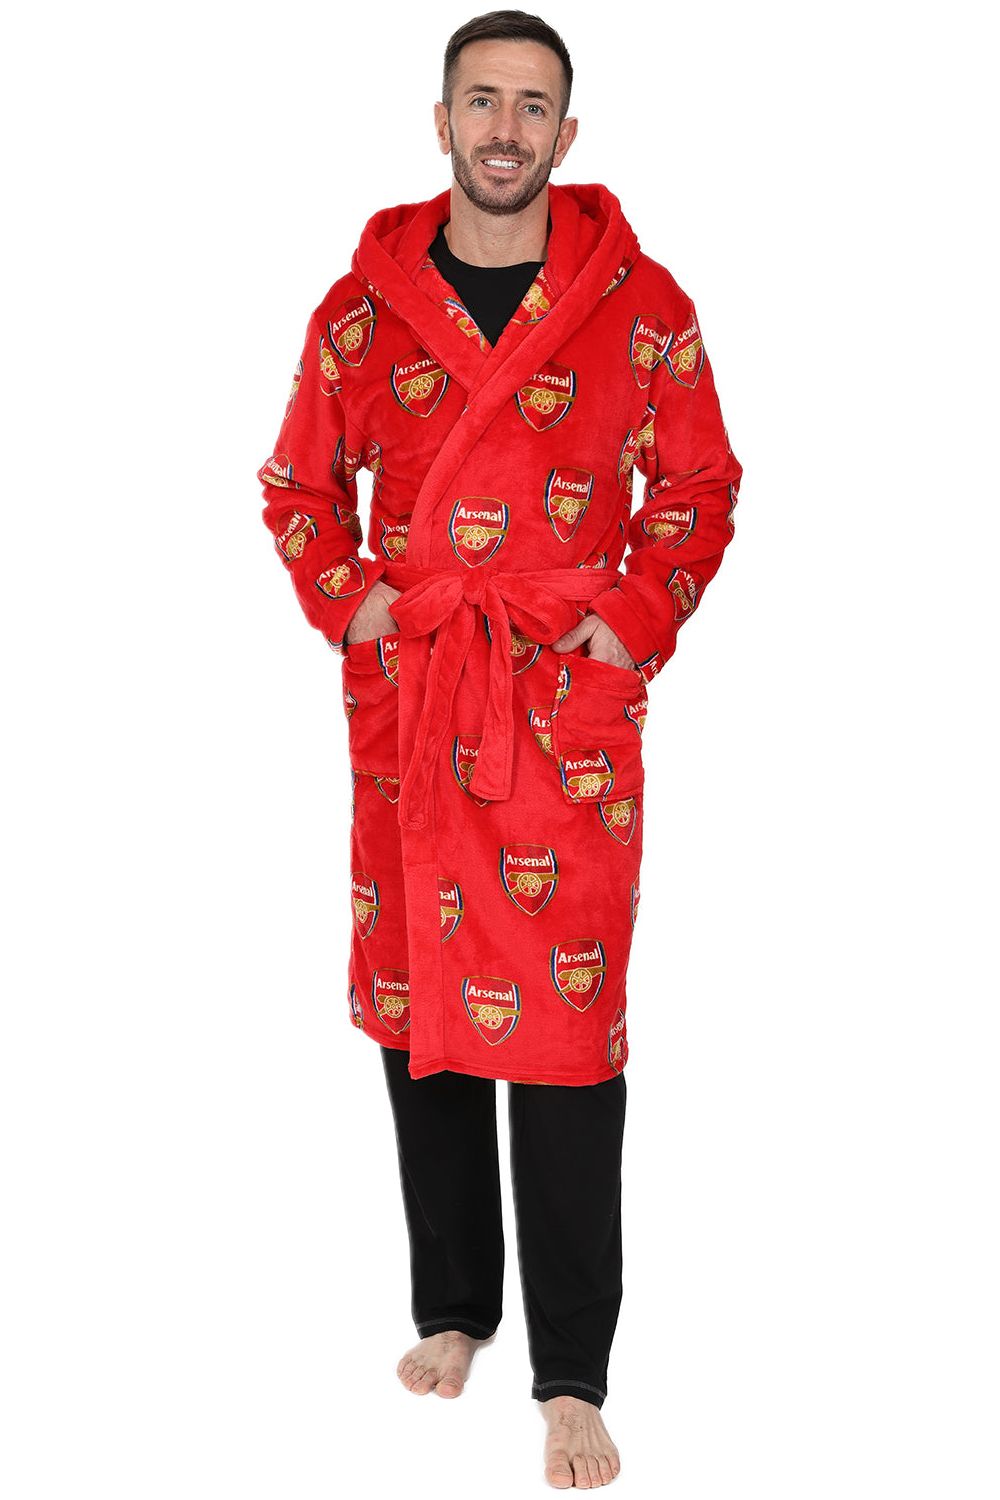 Buy Manchester United FC Official Soccer Gift Mens Fleece Dressing Gown Robe,  Red, Small at Amazon.in